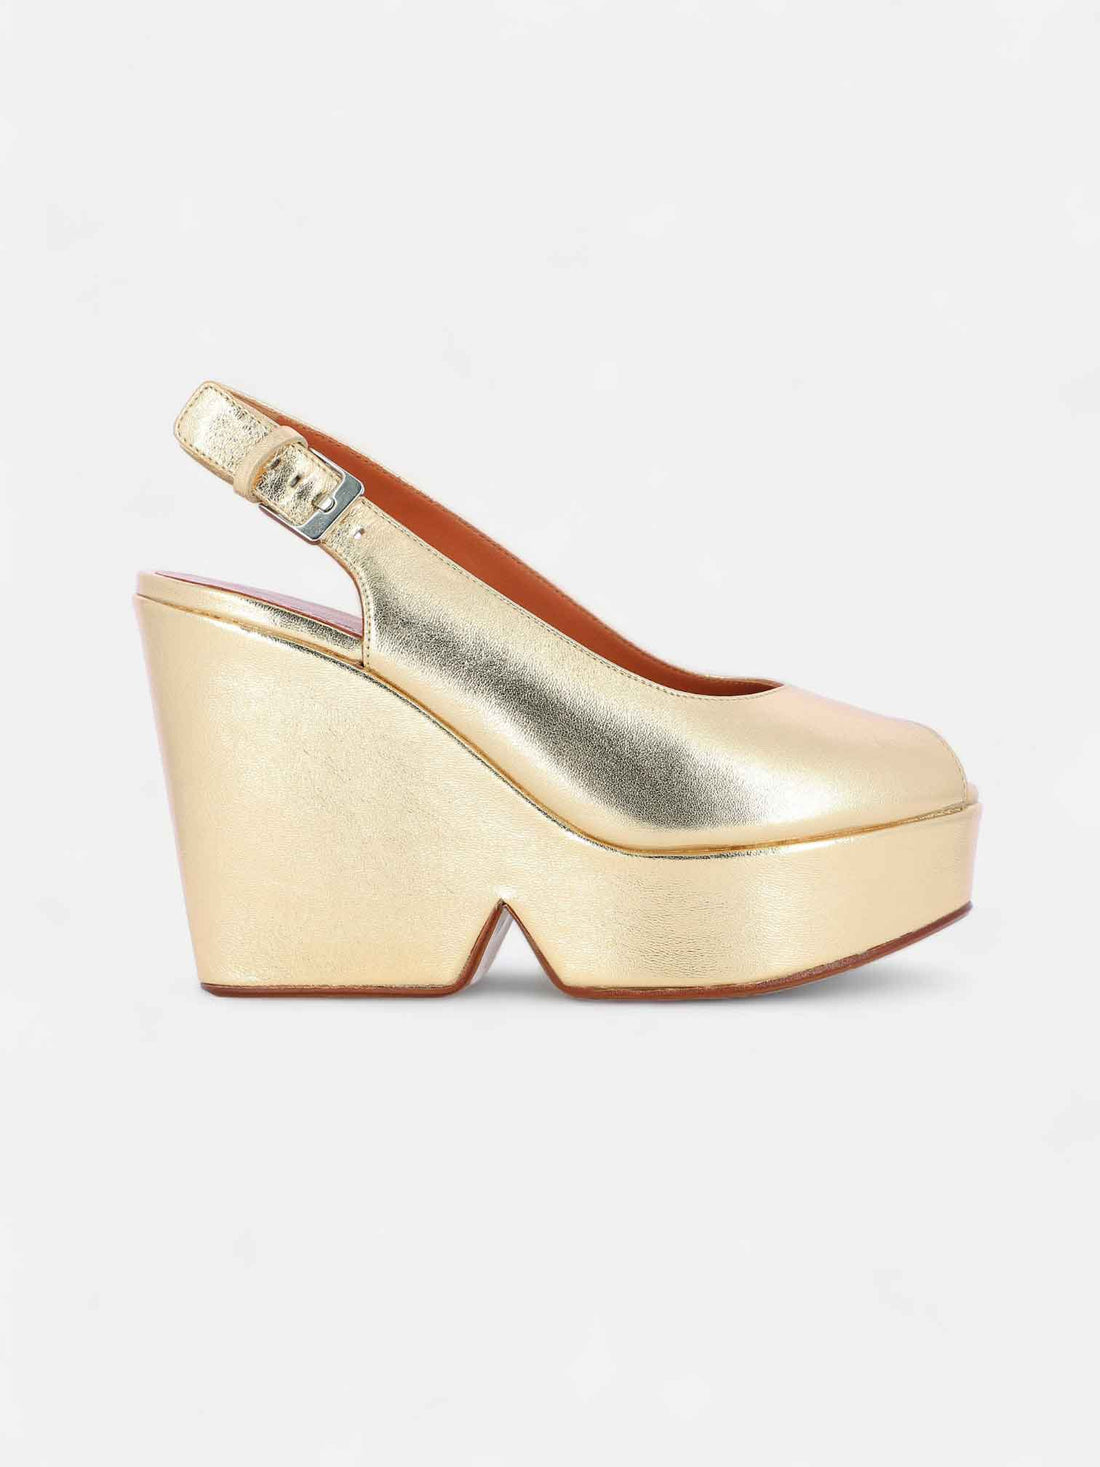 DYLAN wedges, leather gold metallic